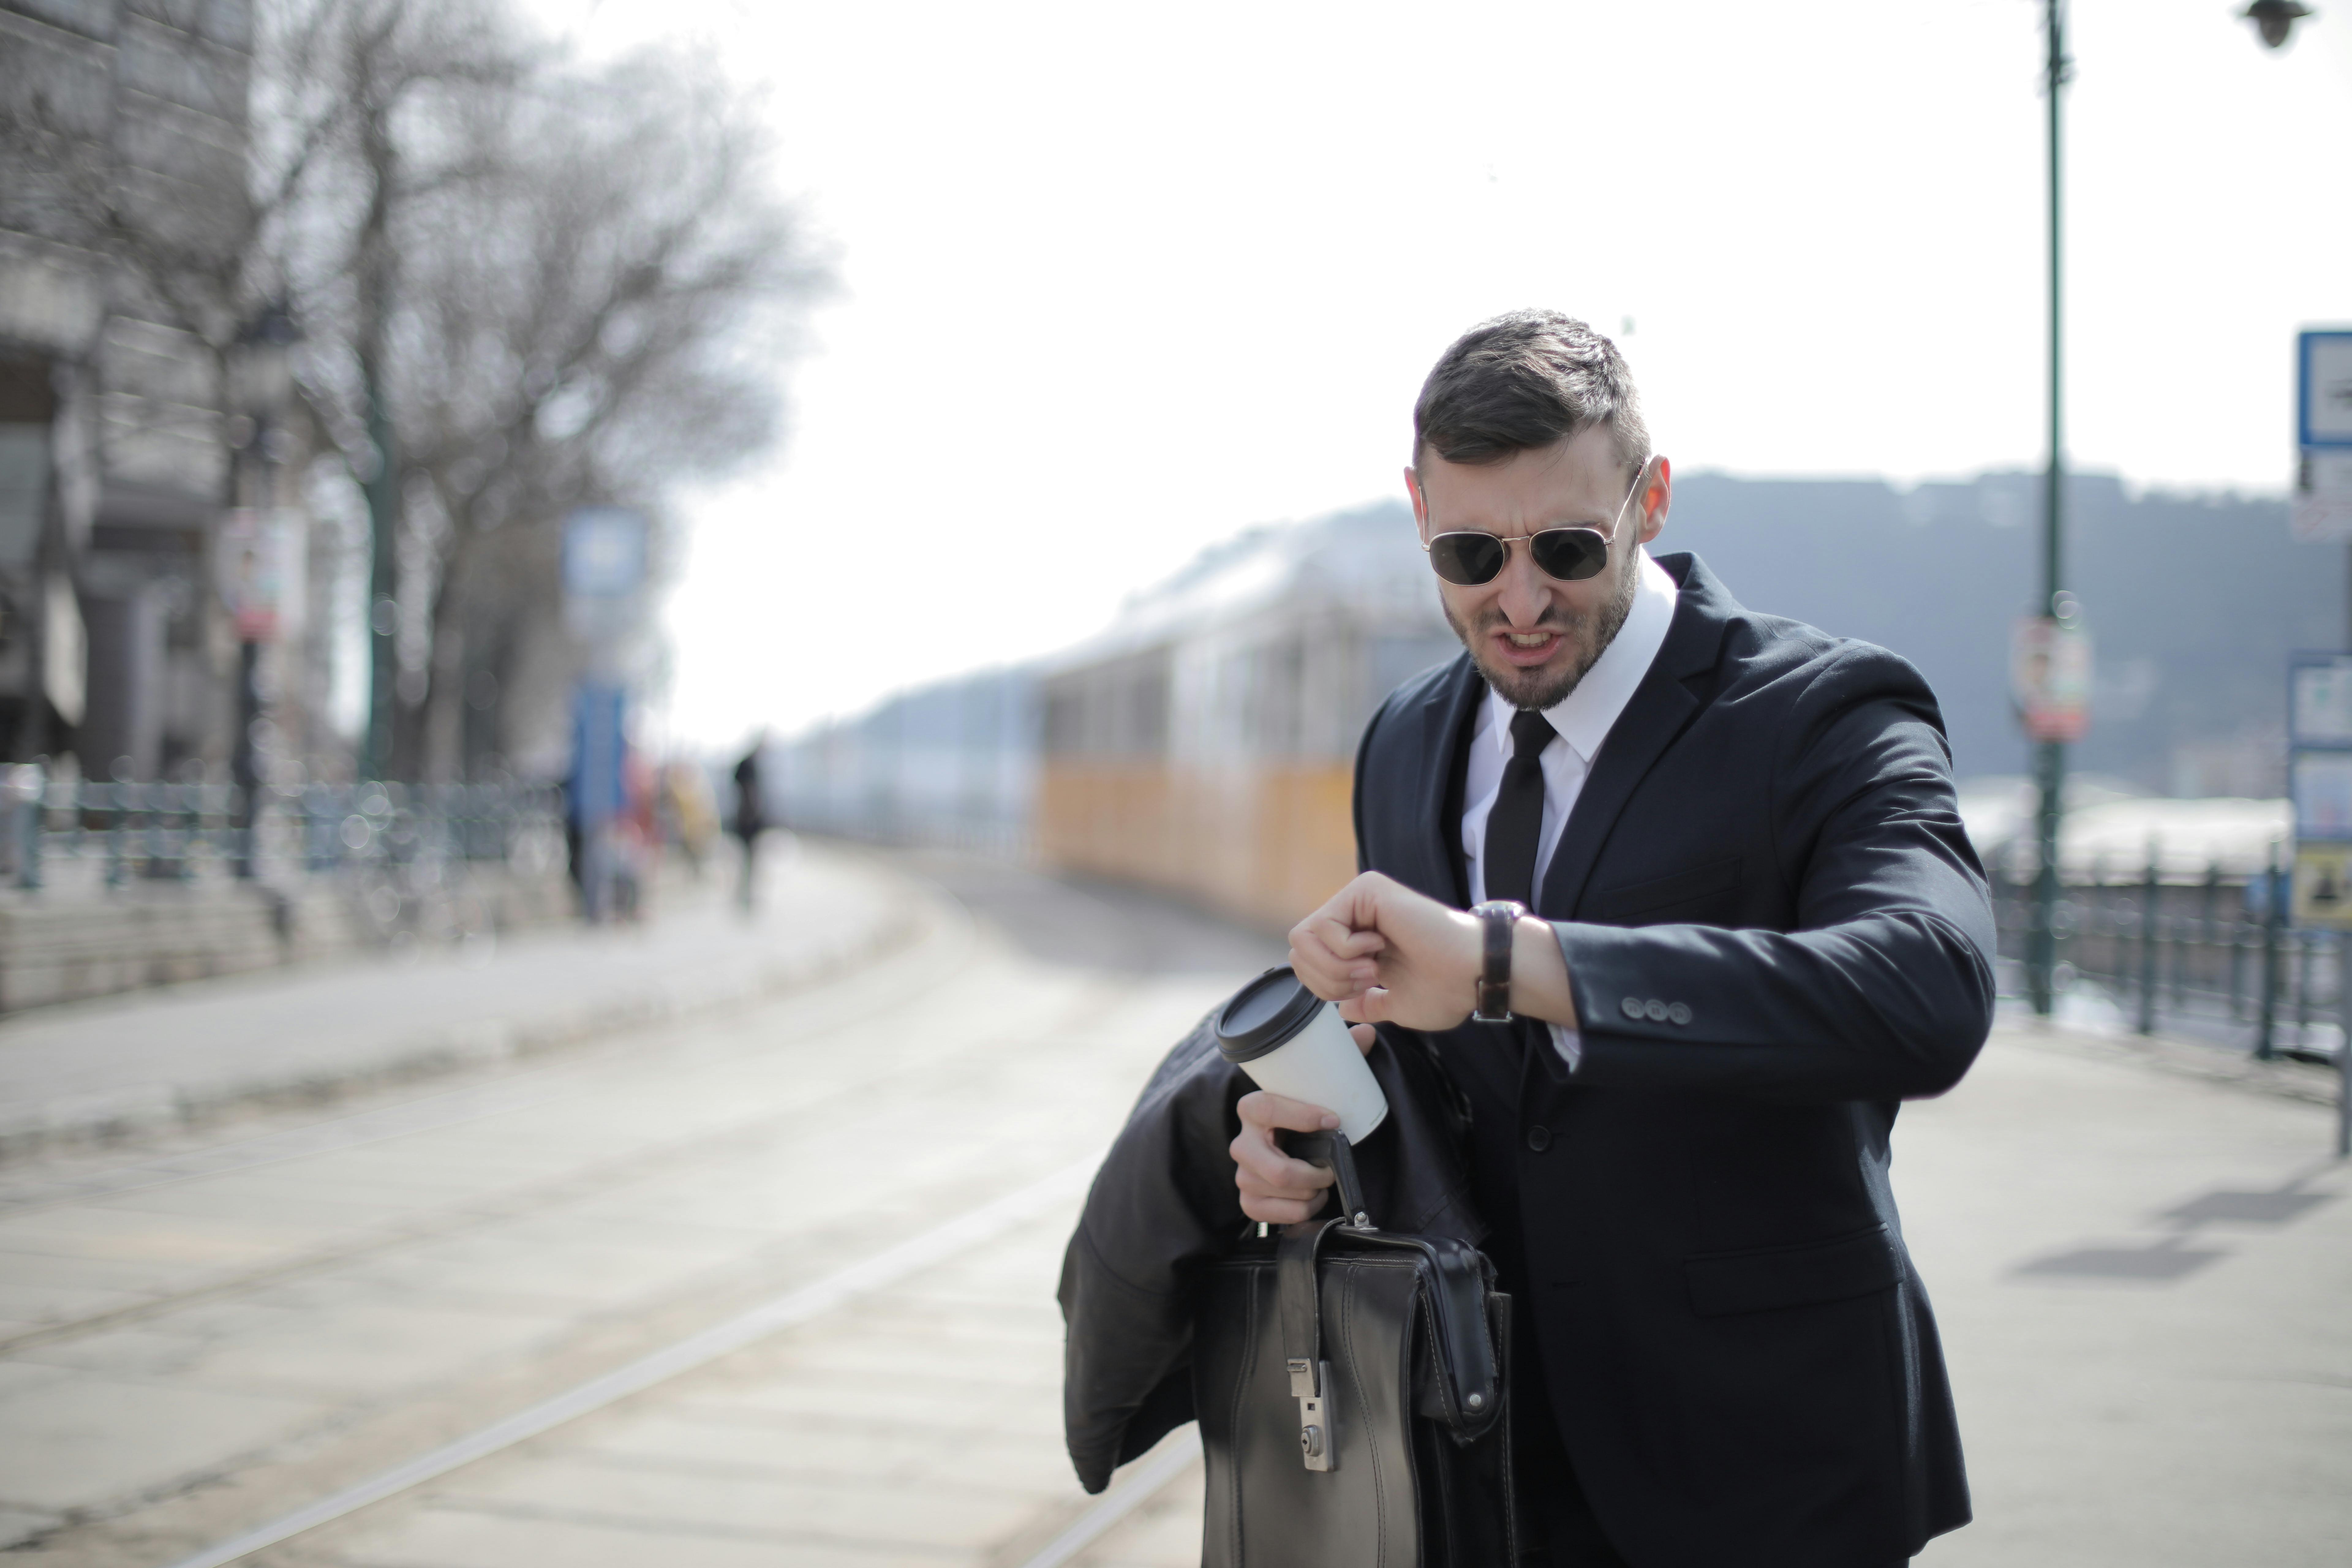 A rushing businessman looking at his watch | Source: Andrea Piacquadio on Pexels